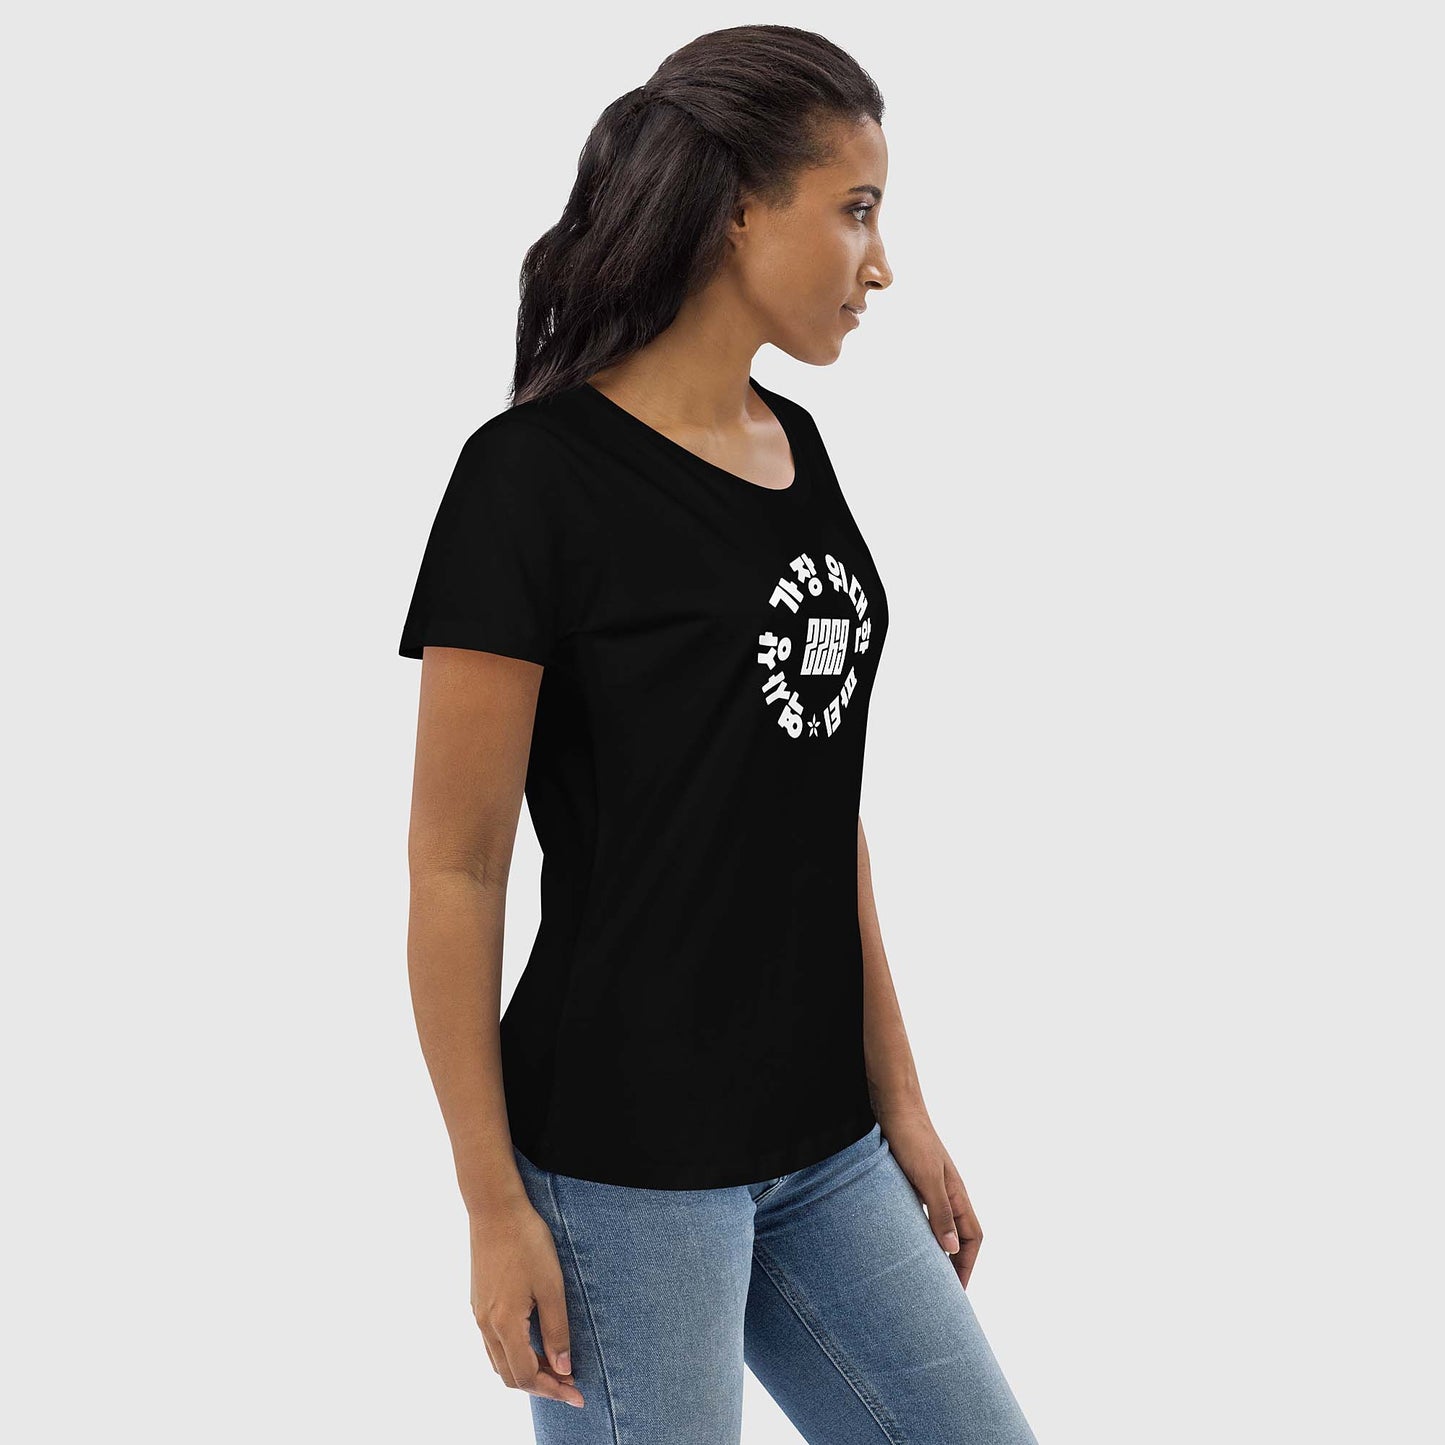 Women's black fitted organic cotton t-shirt with Korean 2269 party circle